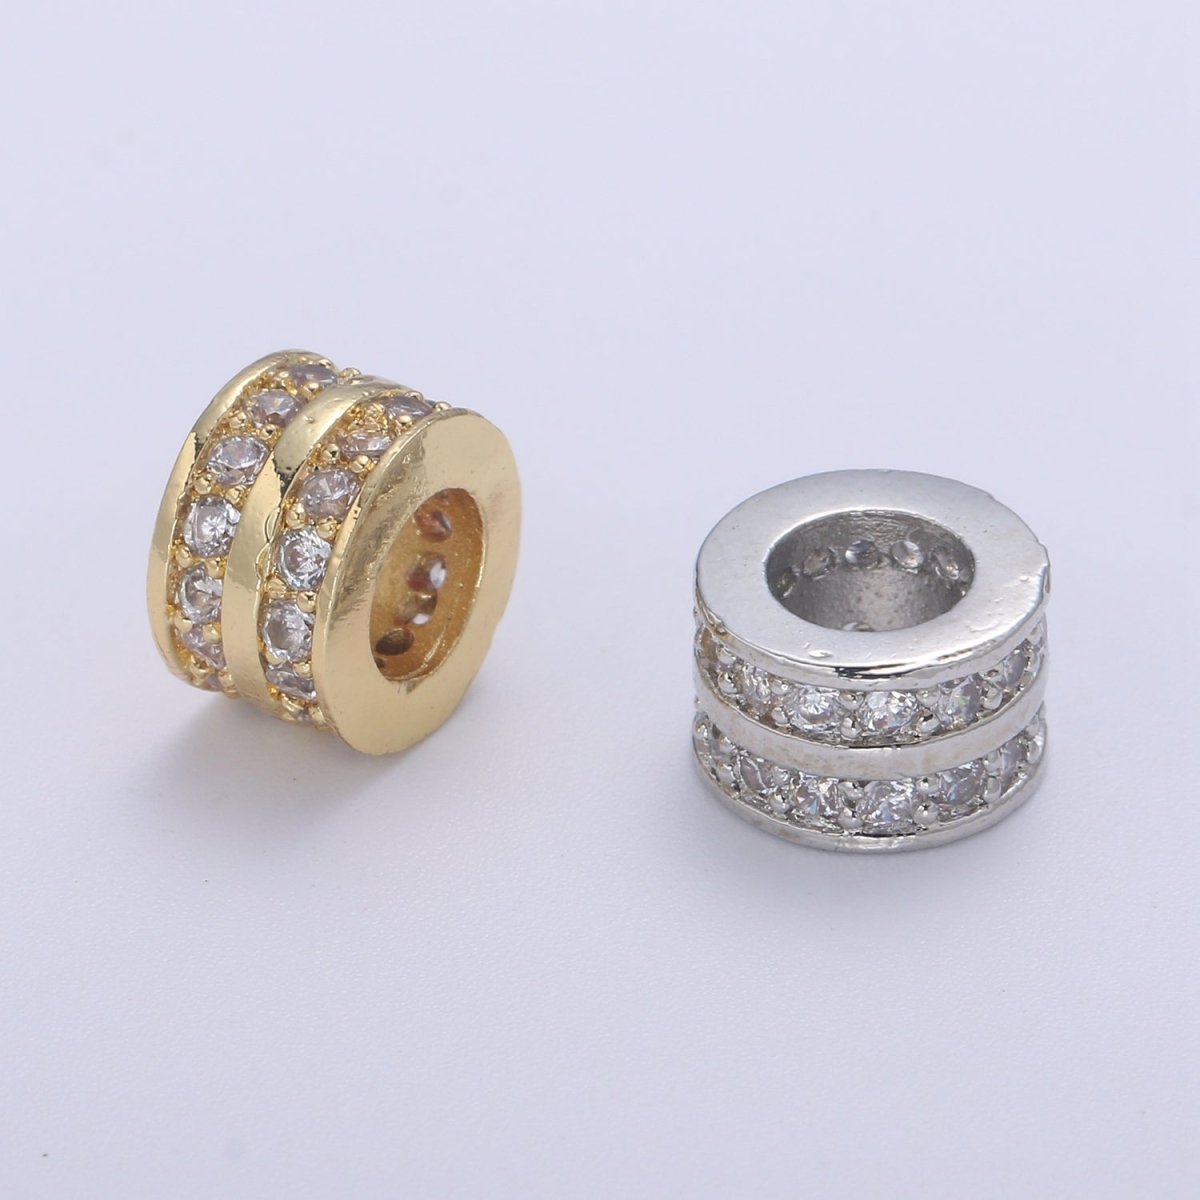 Gold Filled Micro Pave Rondelle Spacer Beads, Big Hole Spacer Beads, Rondelle Spacer Bead, CZ Rondelle, Spacer Beads, B-688 B-689 - DLUXCA